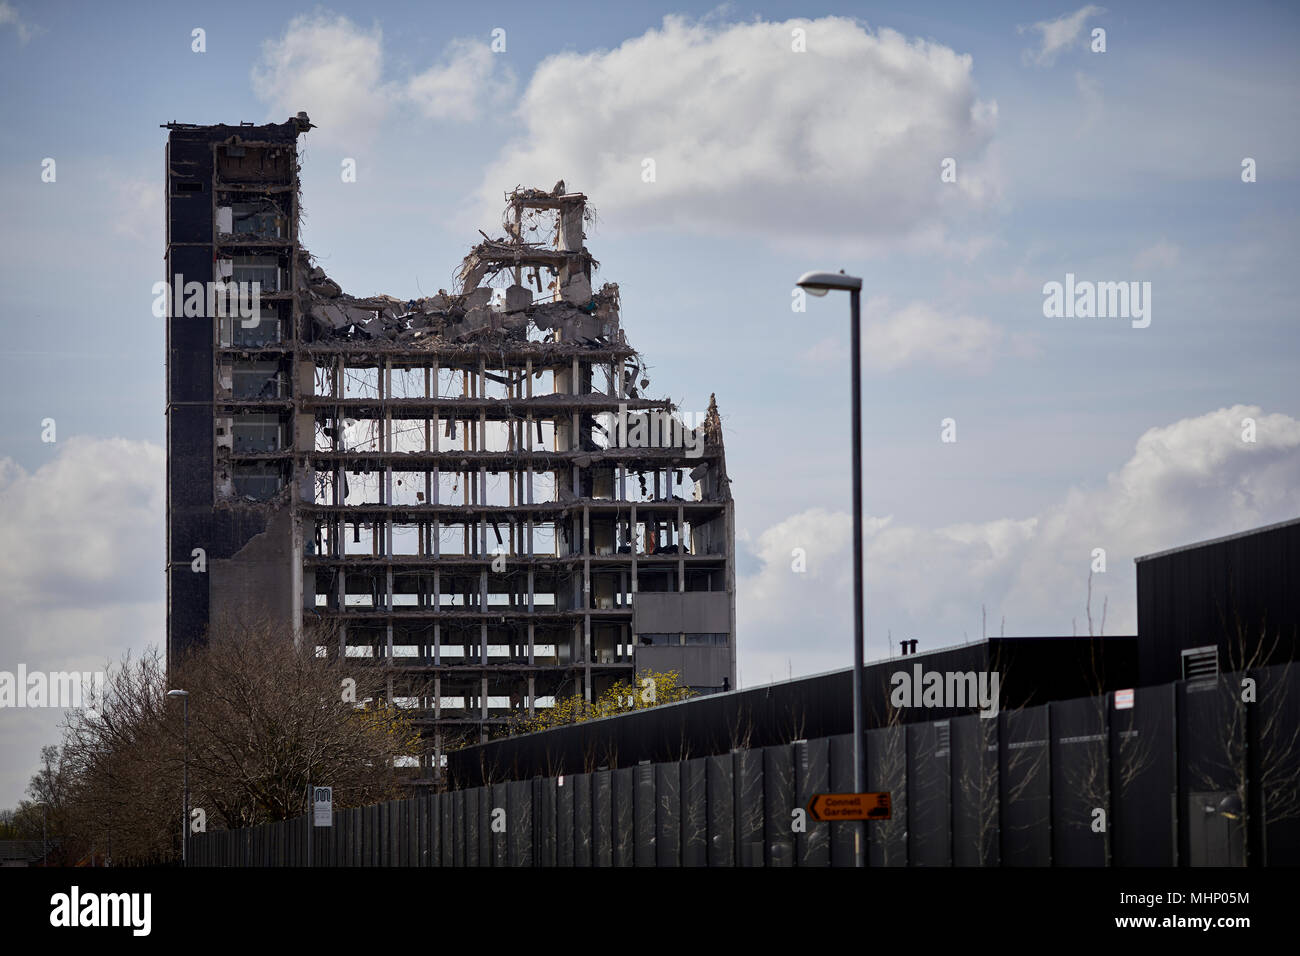 Demolition of Manchester ICL tower in Gorton Designed by architects Cruikshank and Seward, house the cutting-edge computing power of the time, the ICT Stock Photo